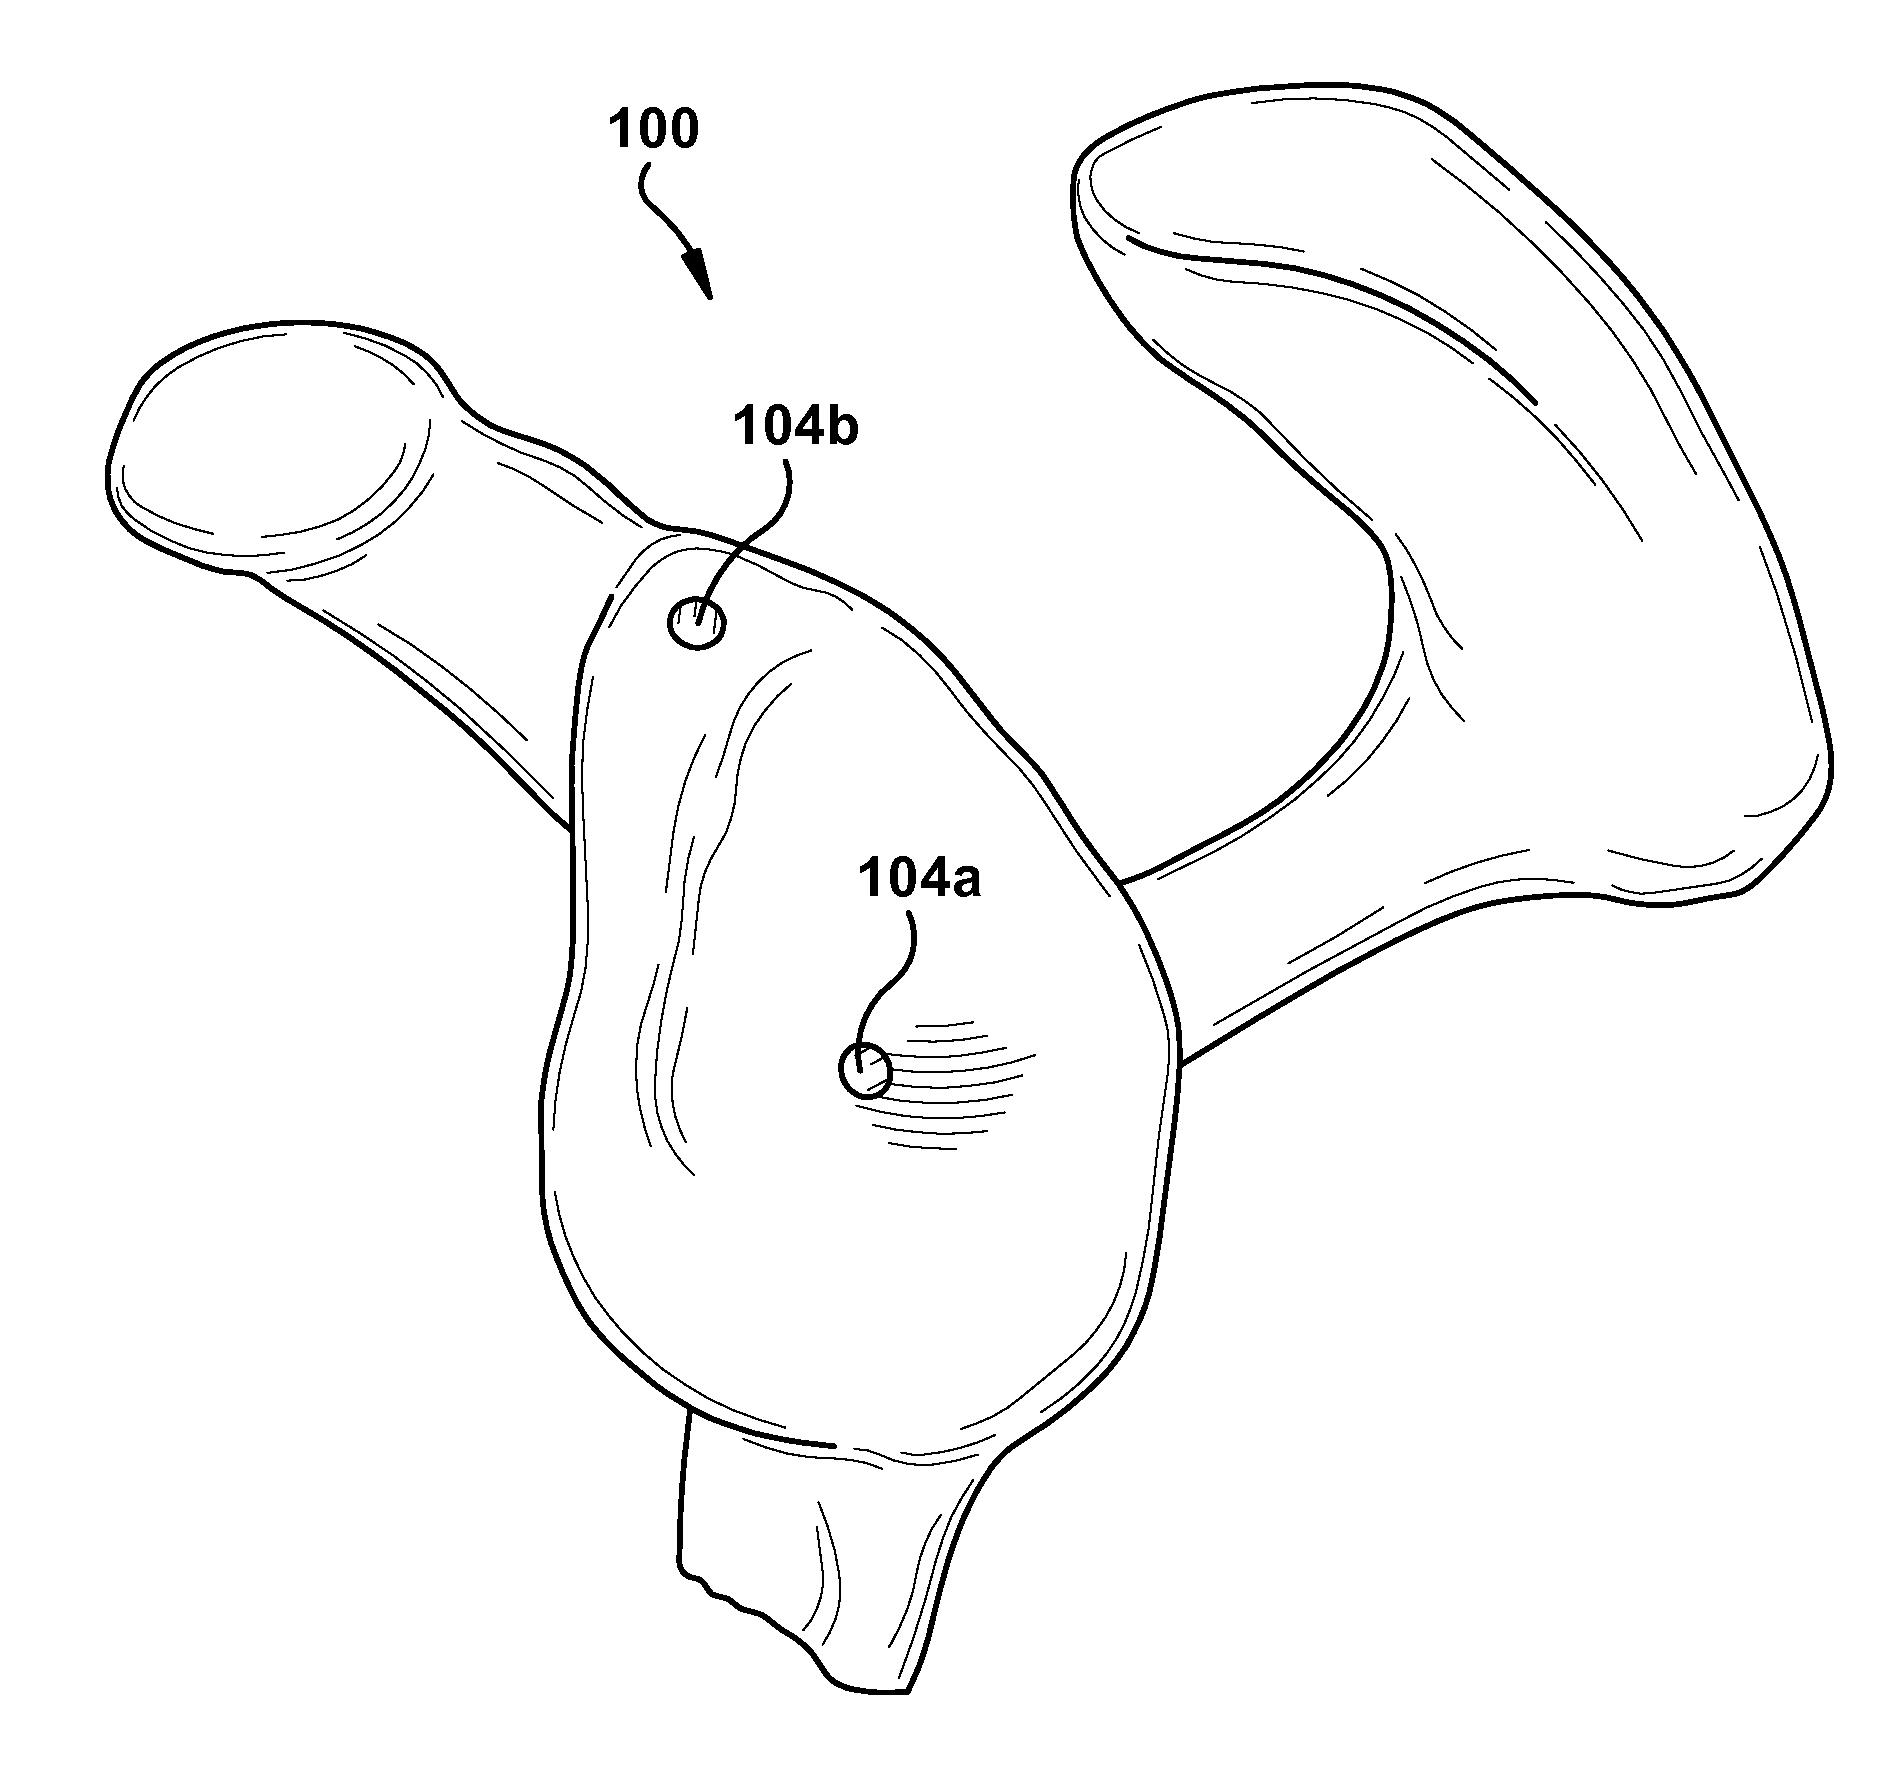 Method and system for producing at least one patient-specific surgical aid